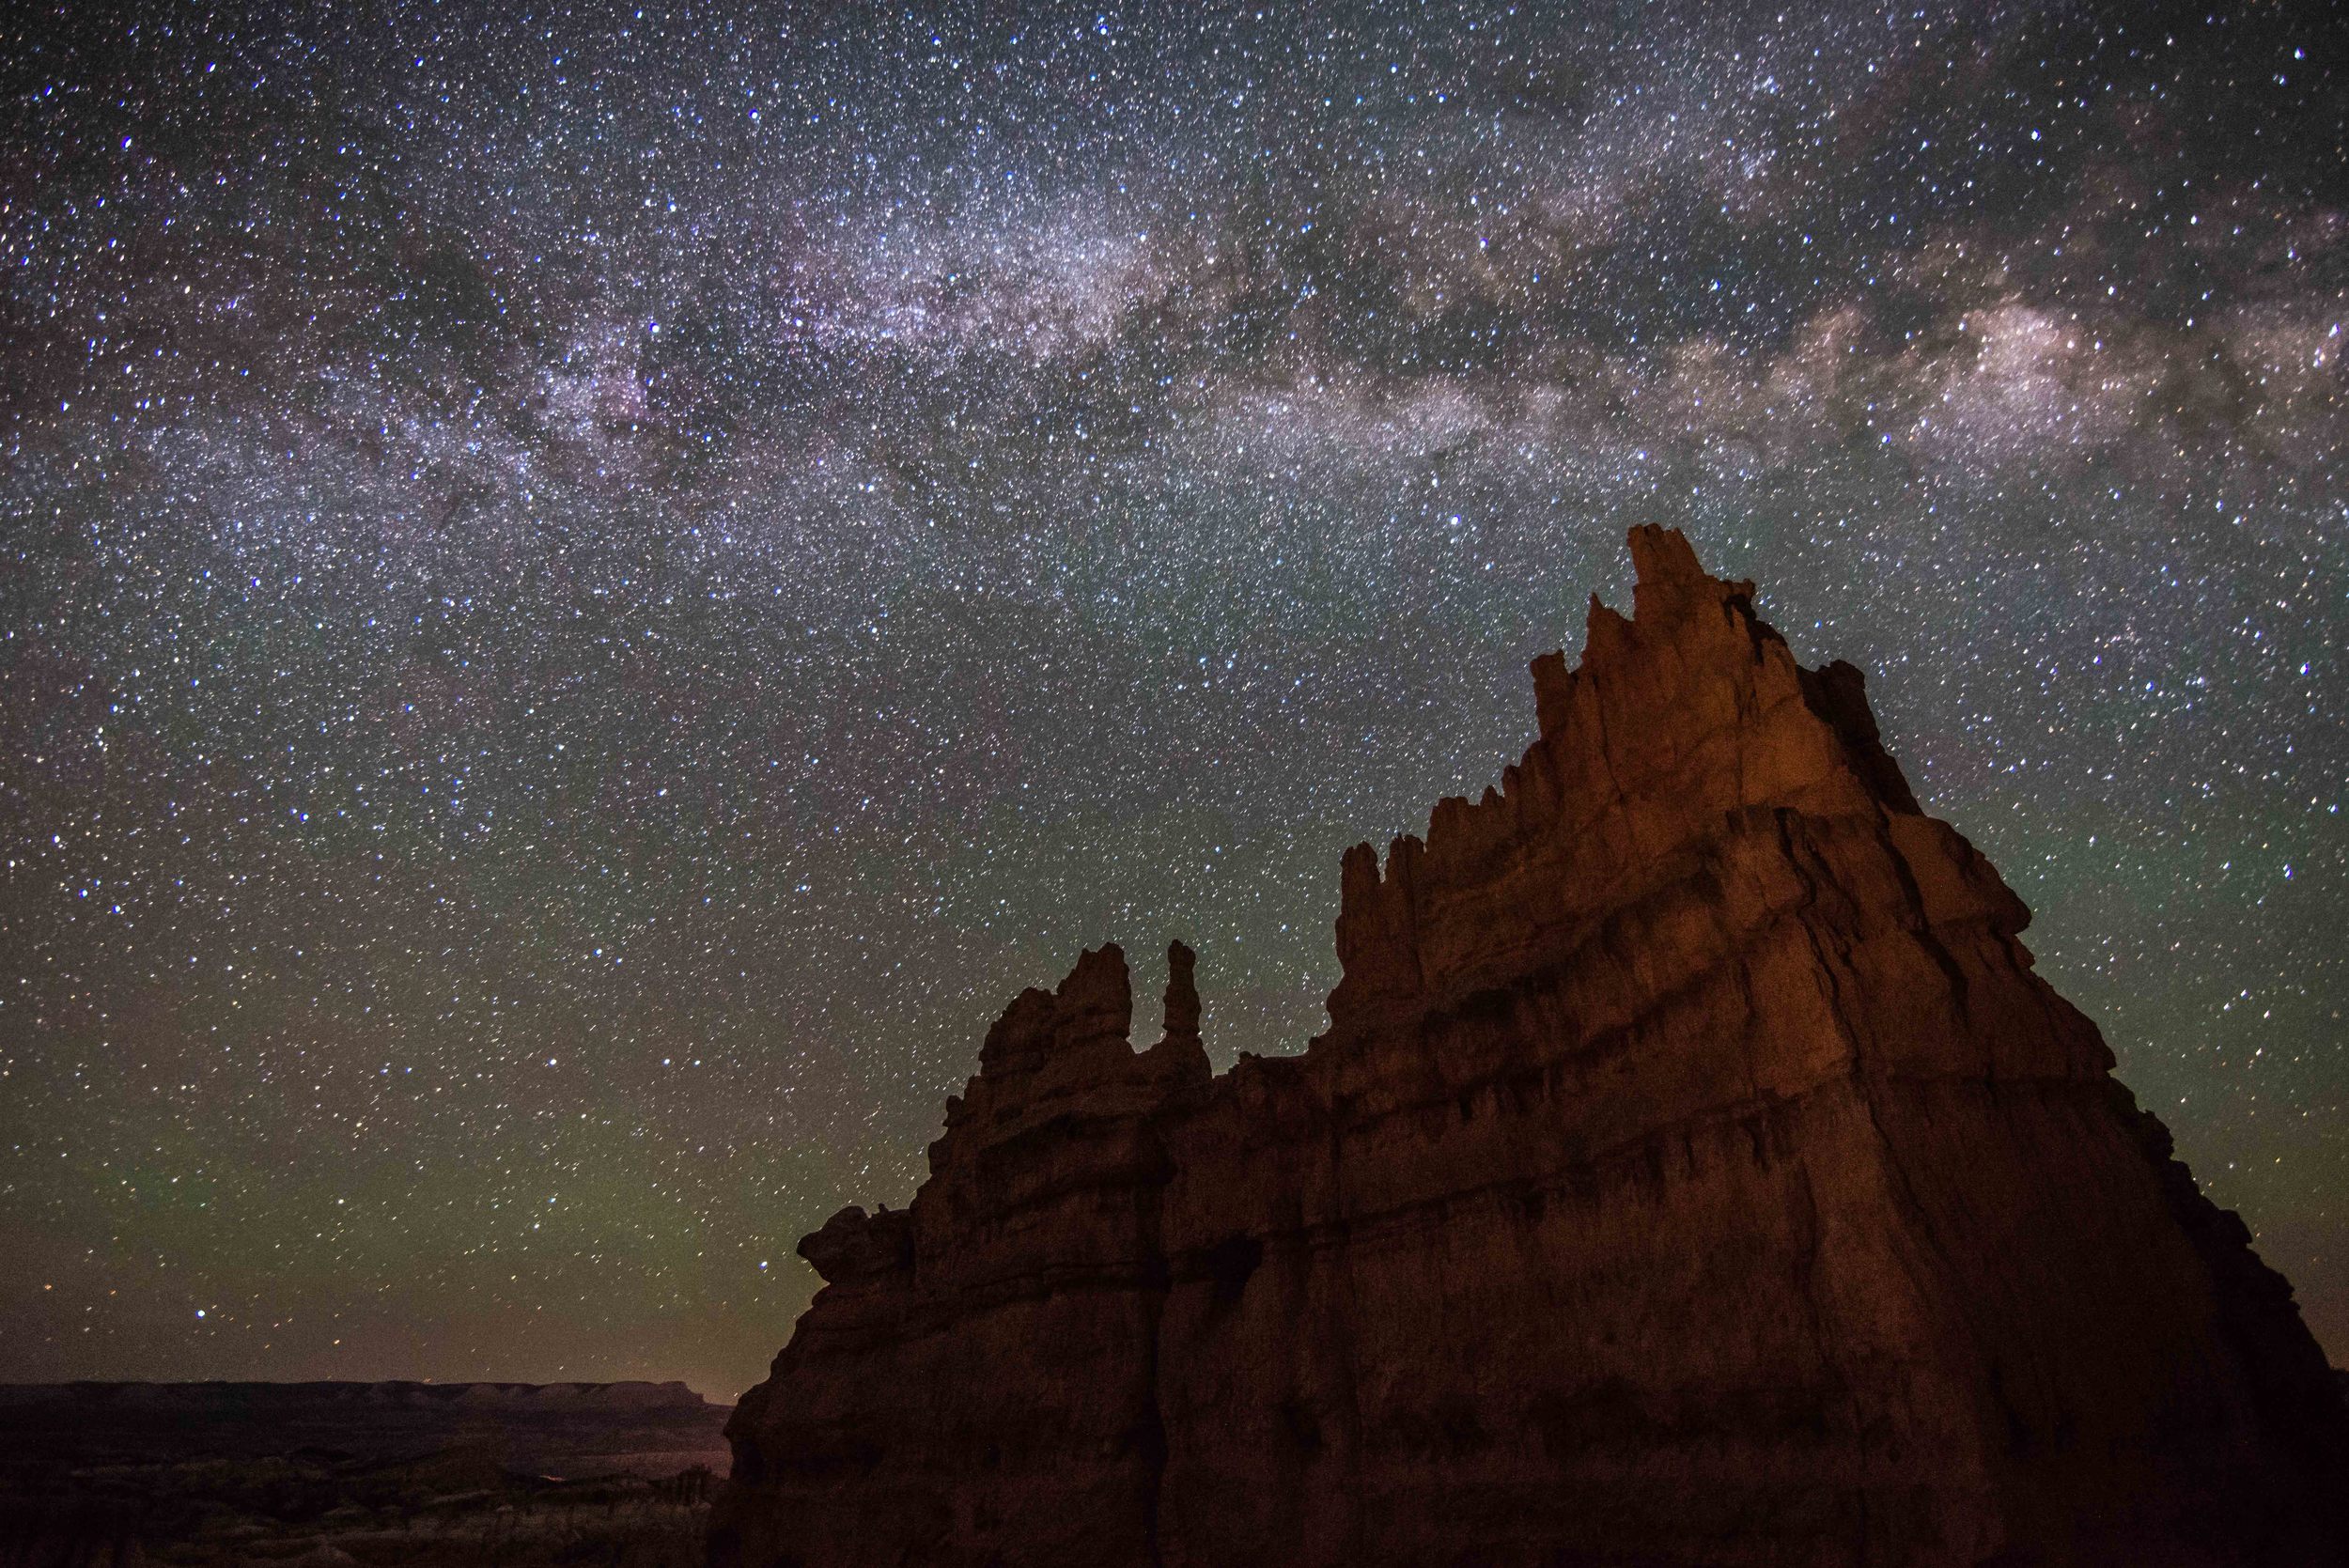 Hoodoo Formation in Bryce Canyon National Park at Night